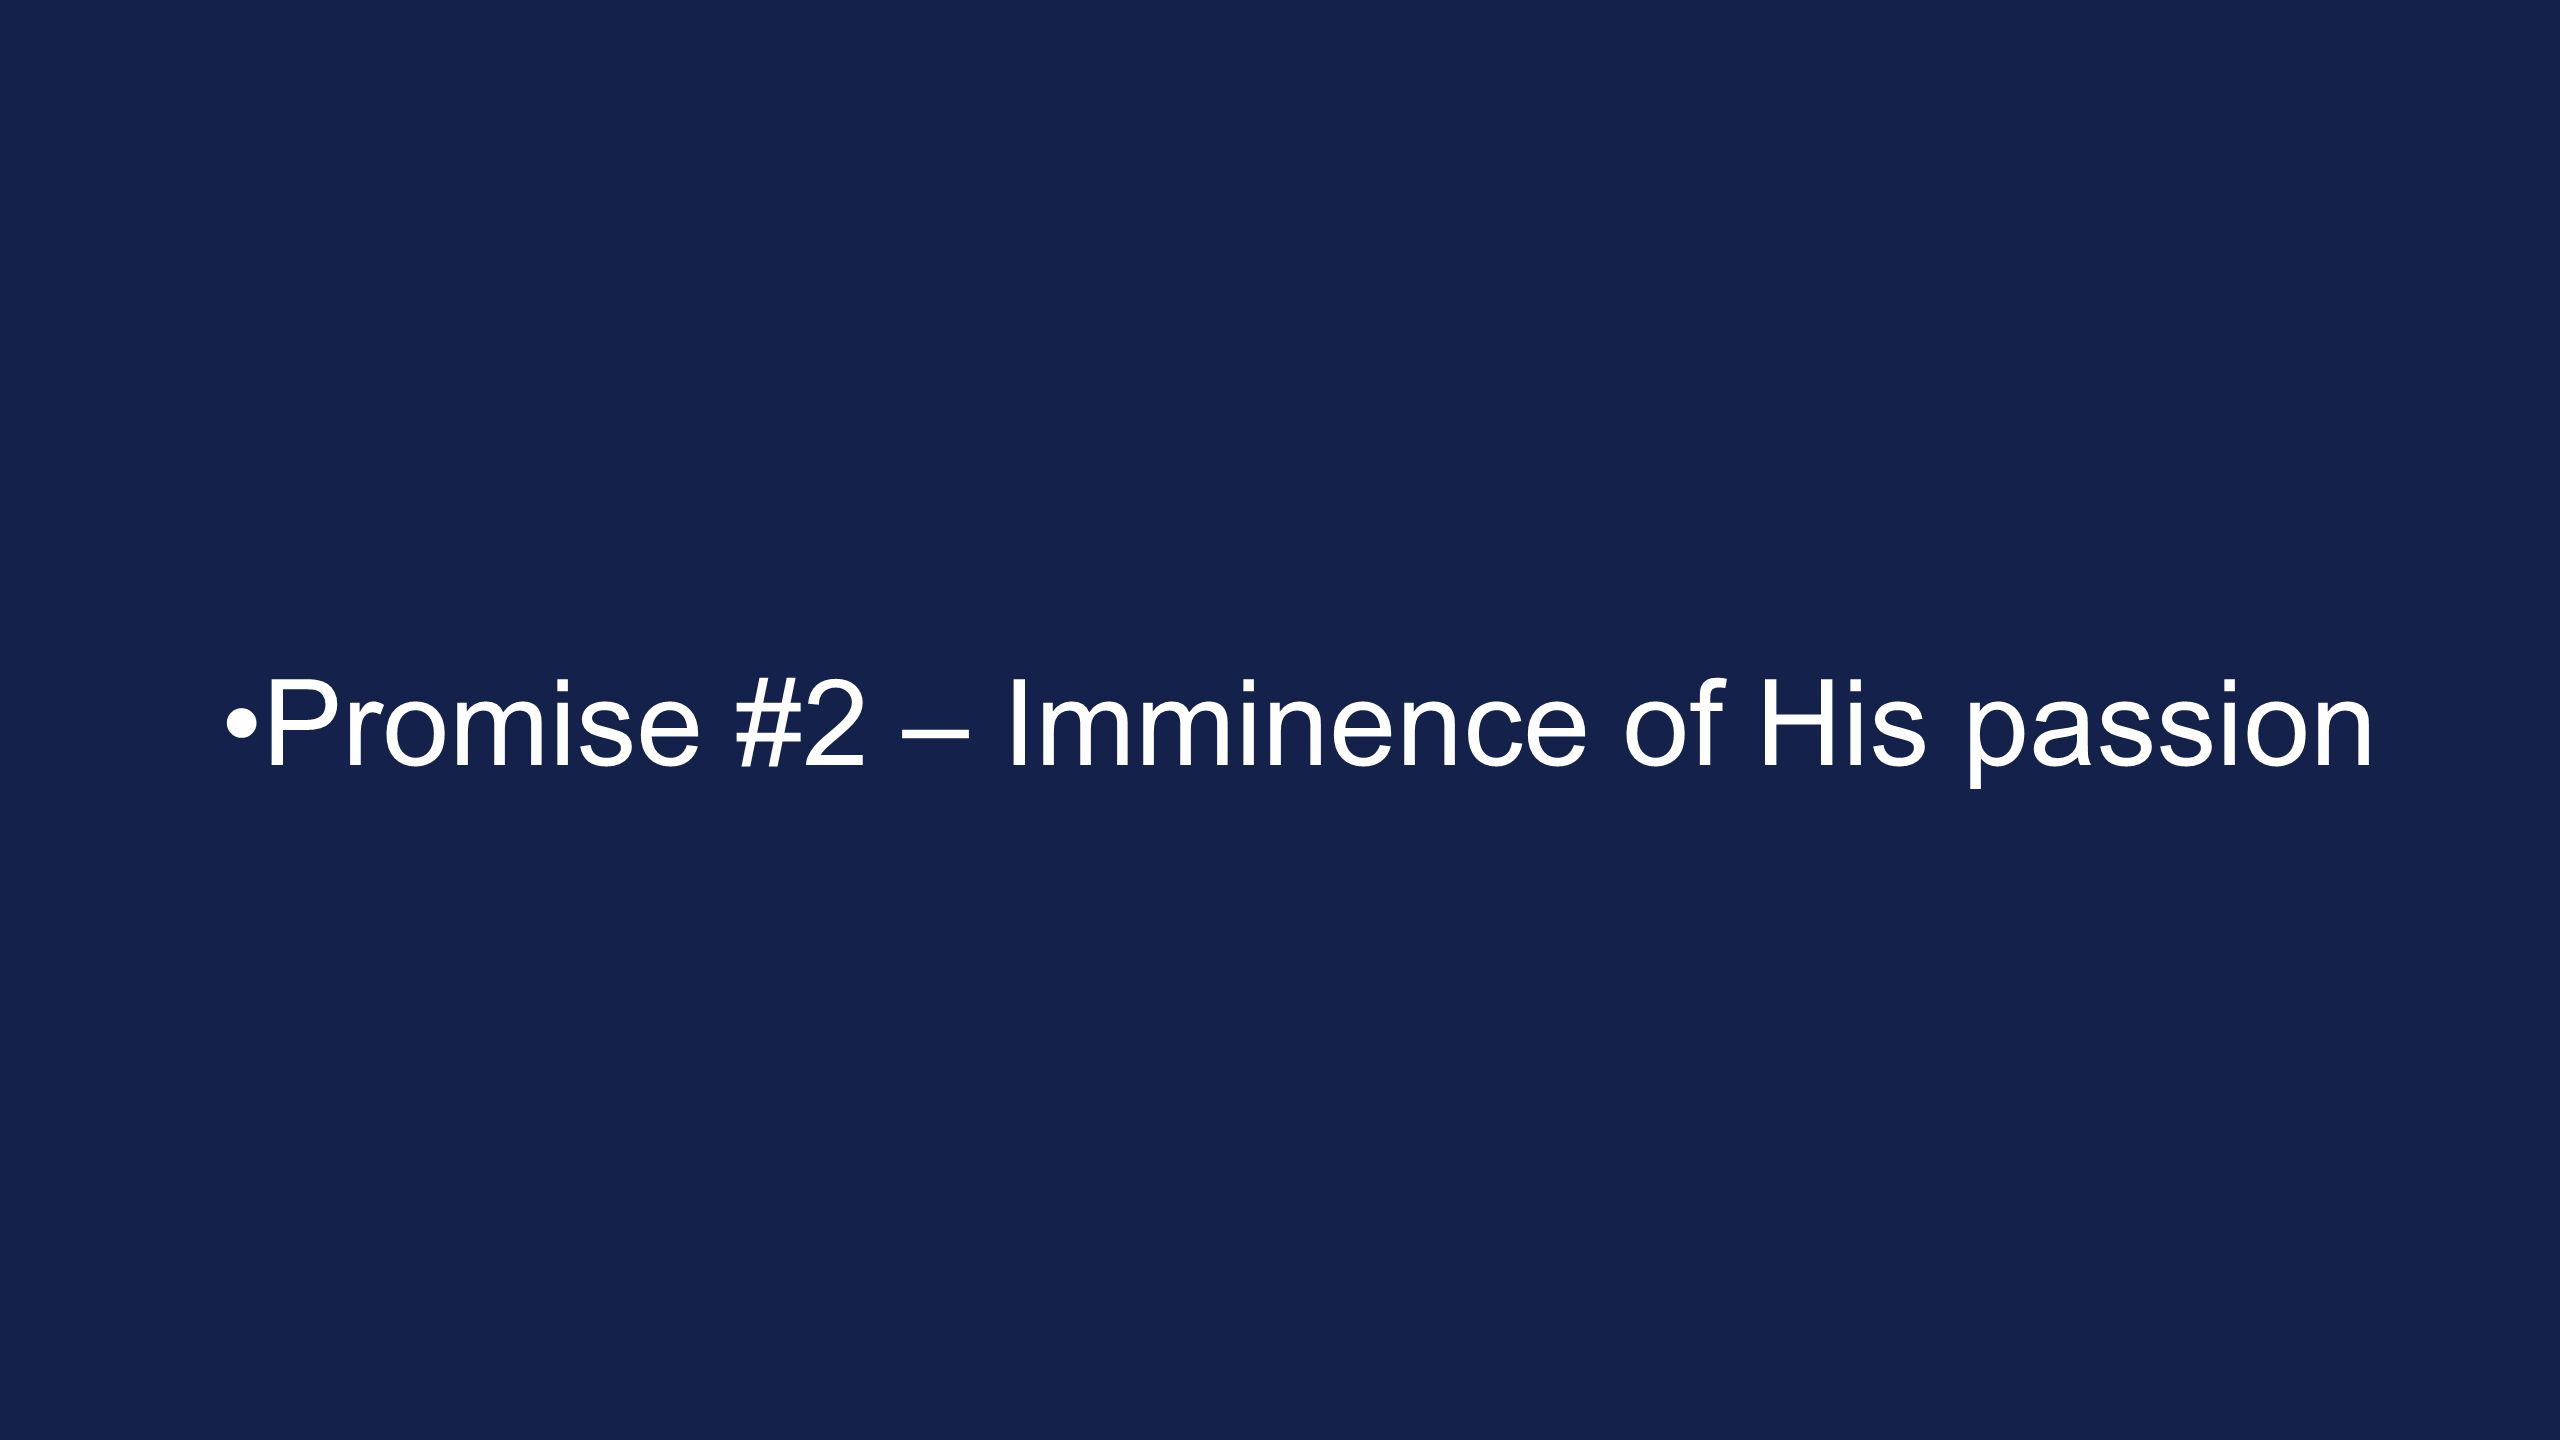 Promise #2 – Imminence of His passion